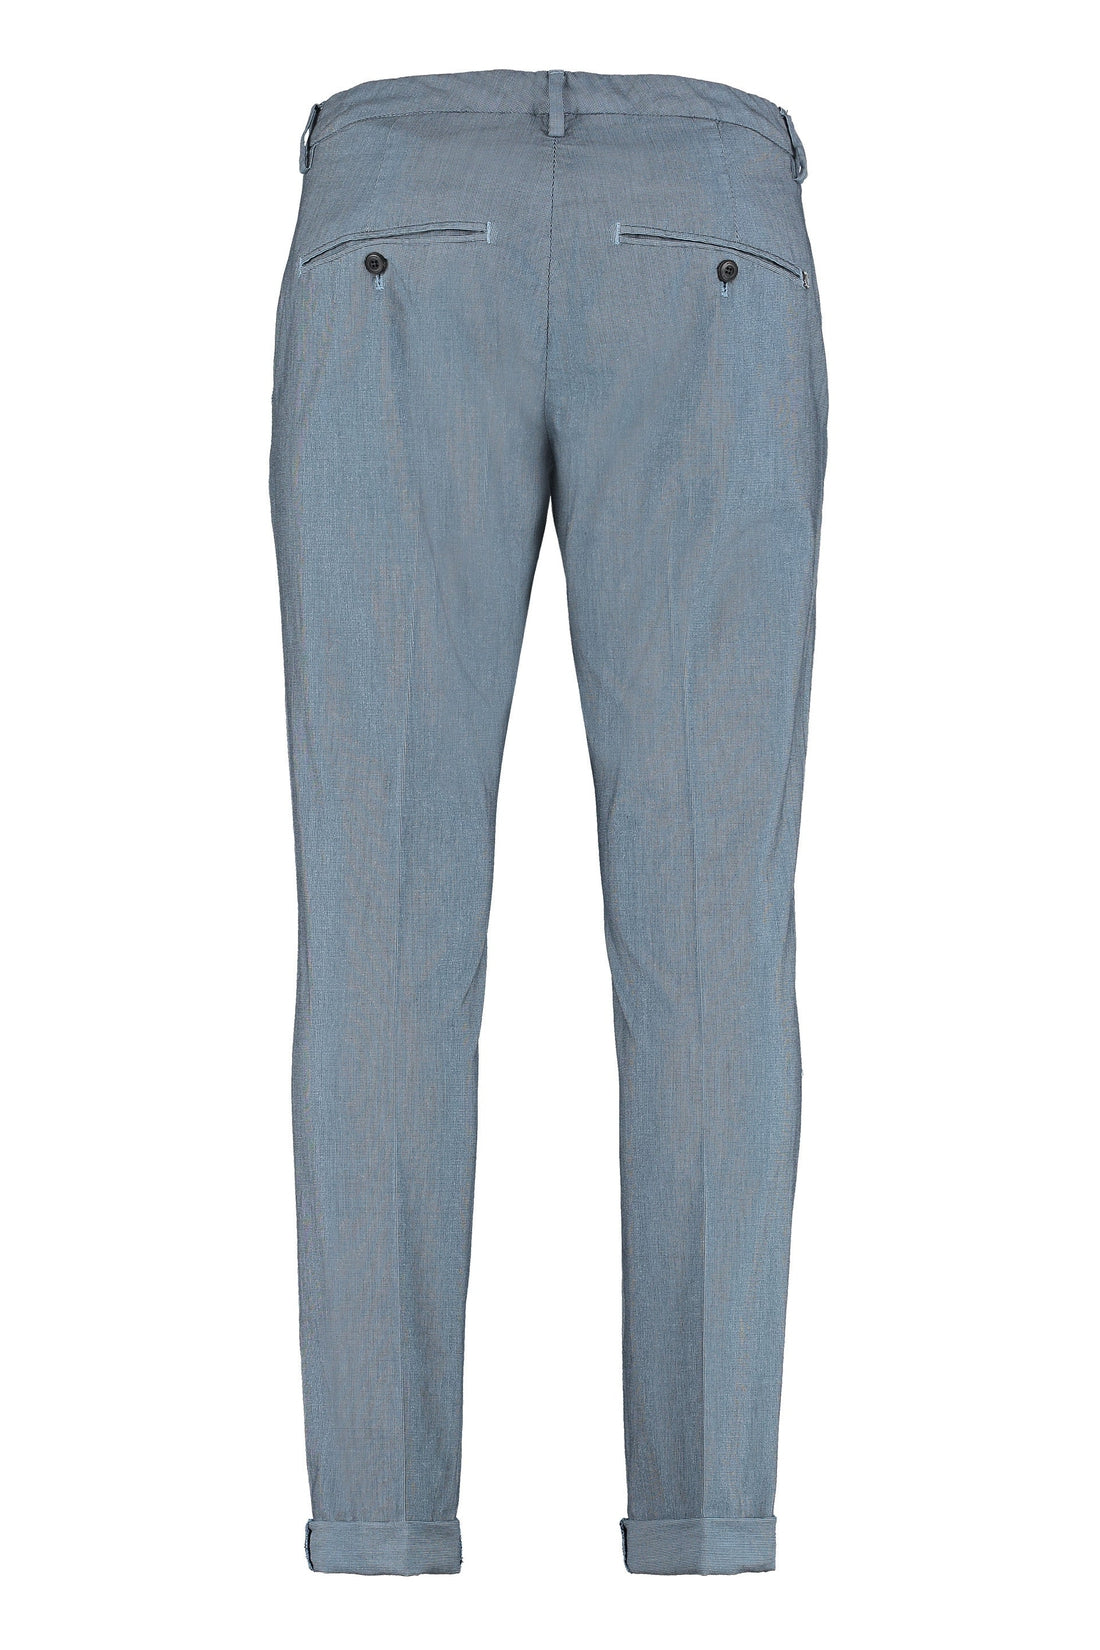 Dondup-OUTLET-SALE-Gaubert stretch cotton chino trousers-ARCHIVIST